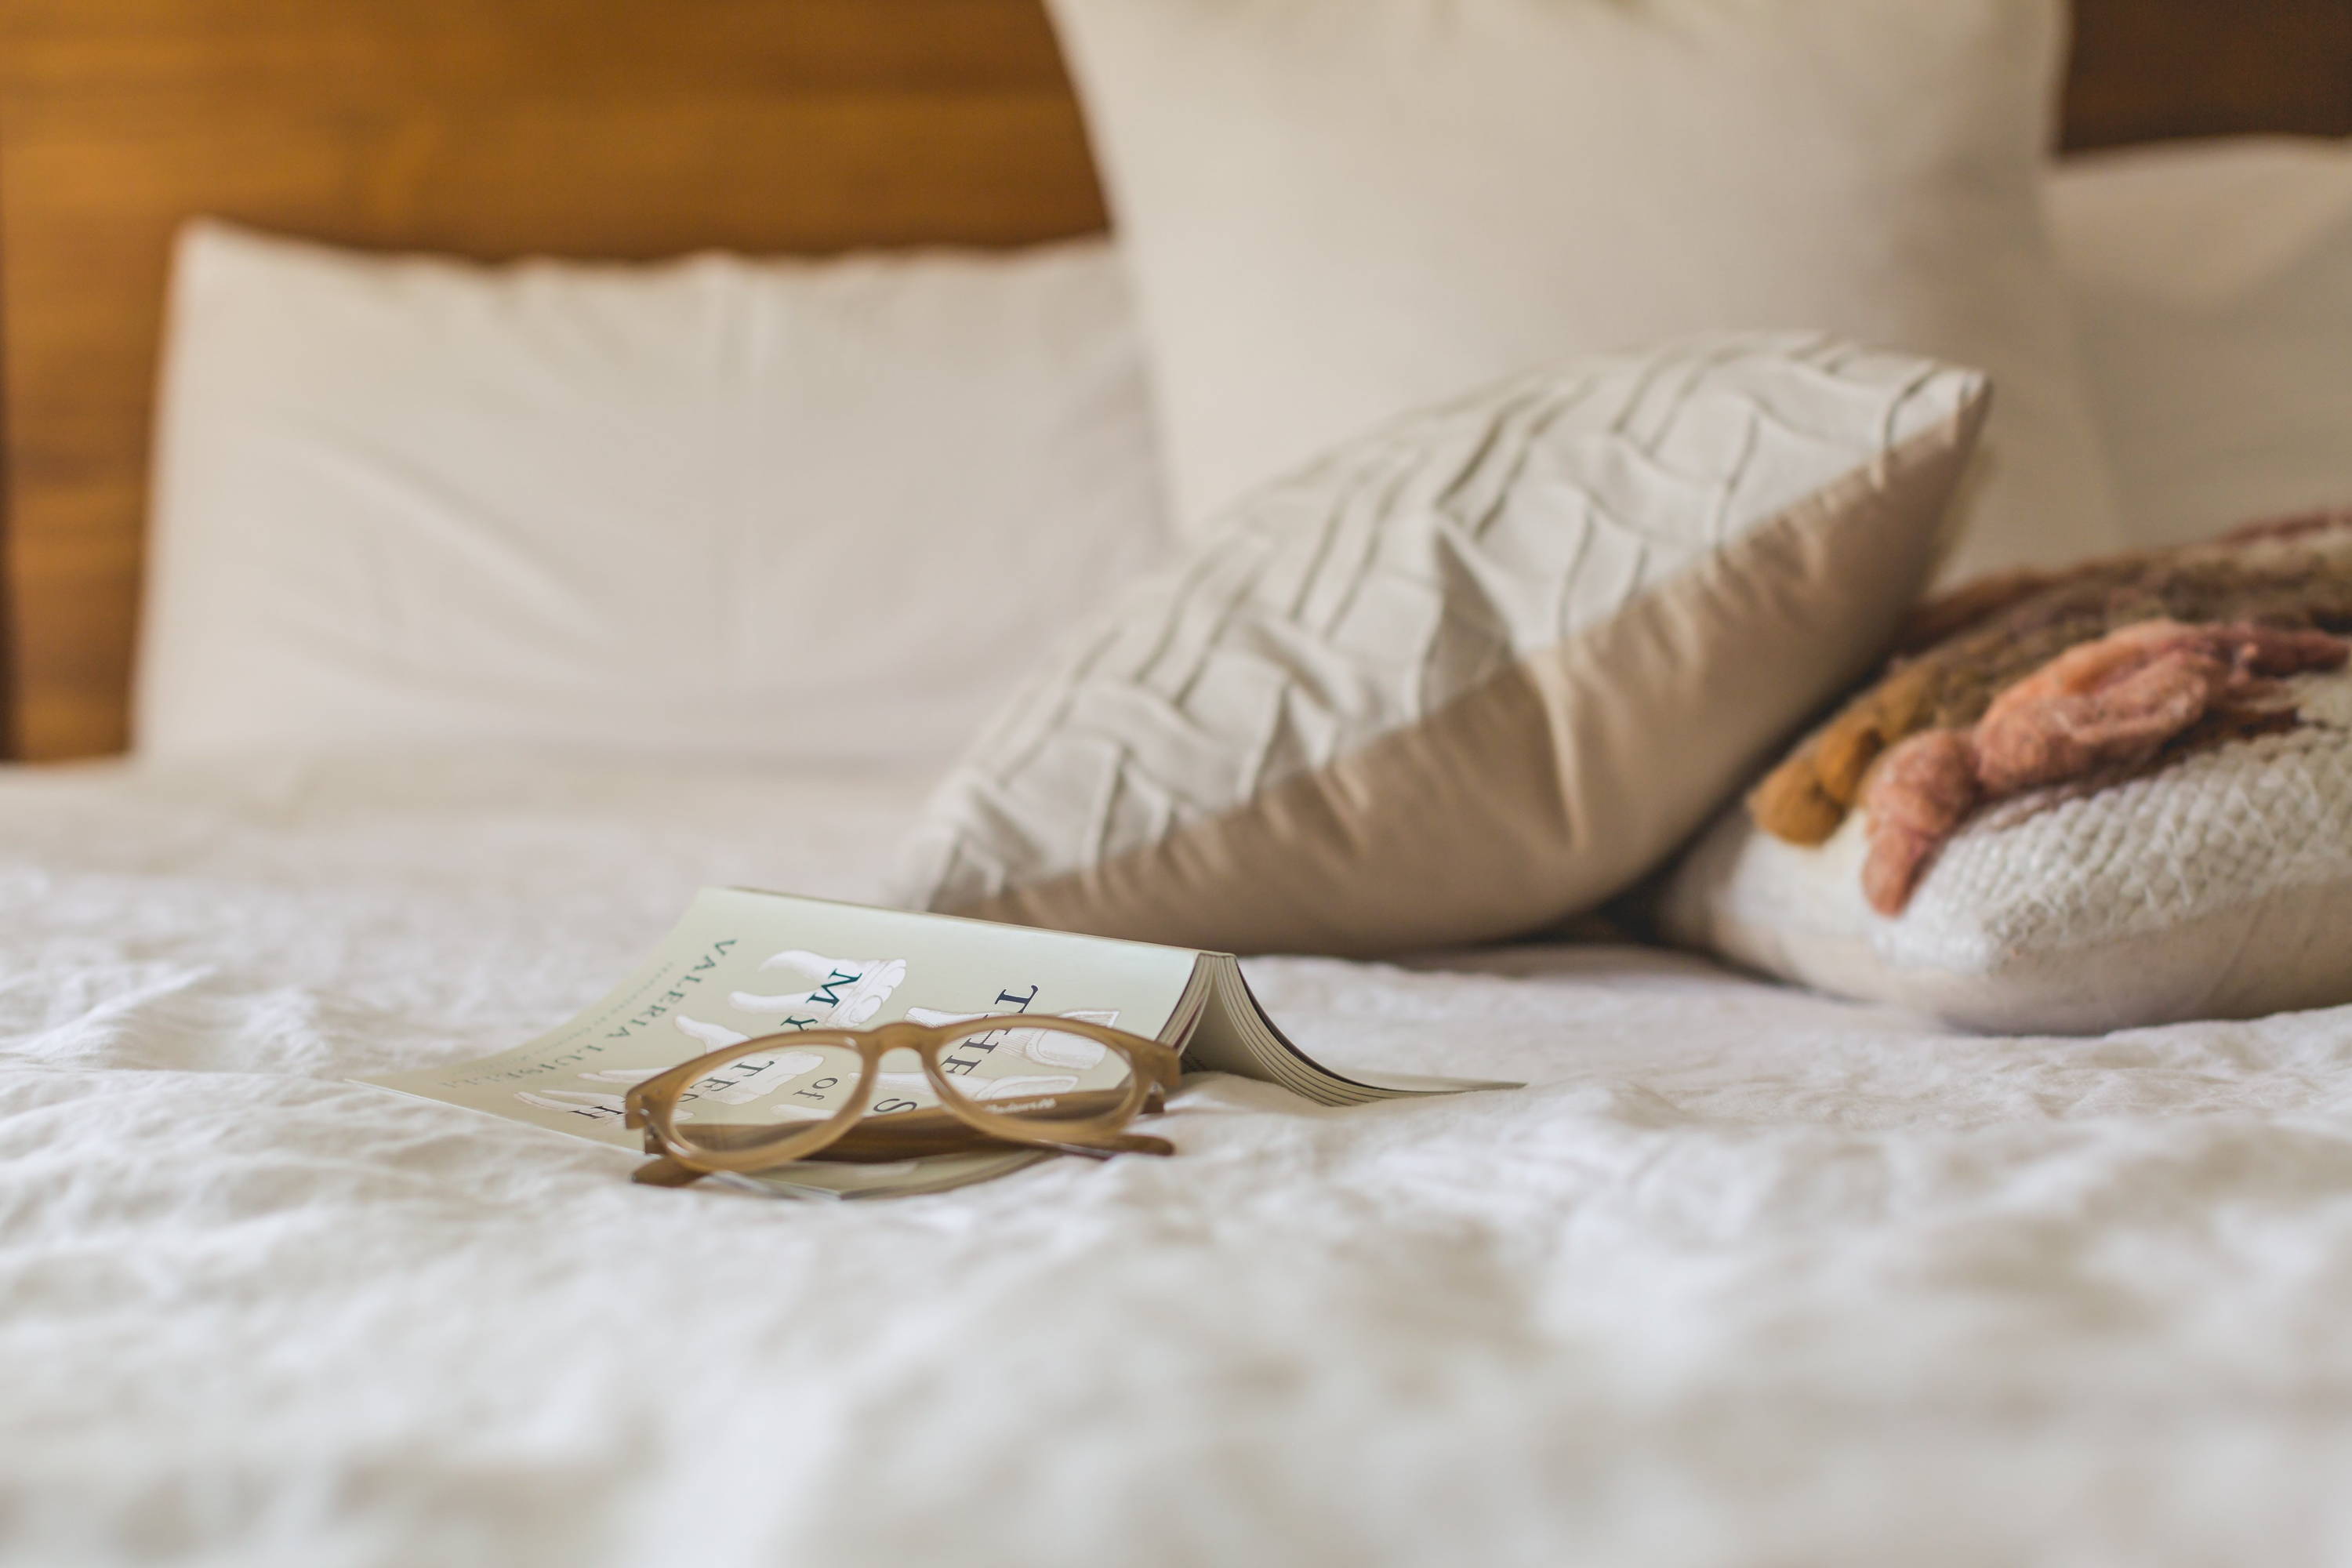 Bed with an open book and eyeglasses placed on the covers.